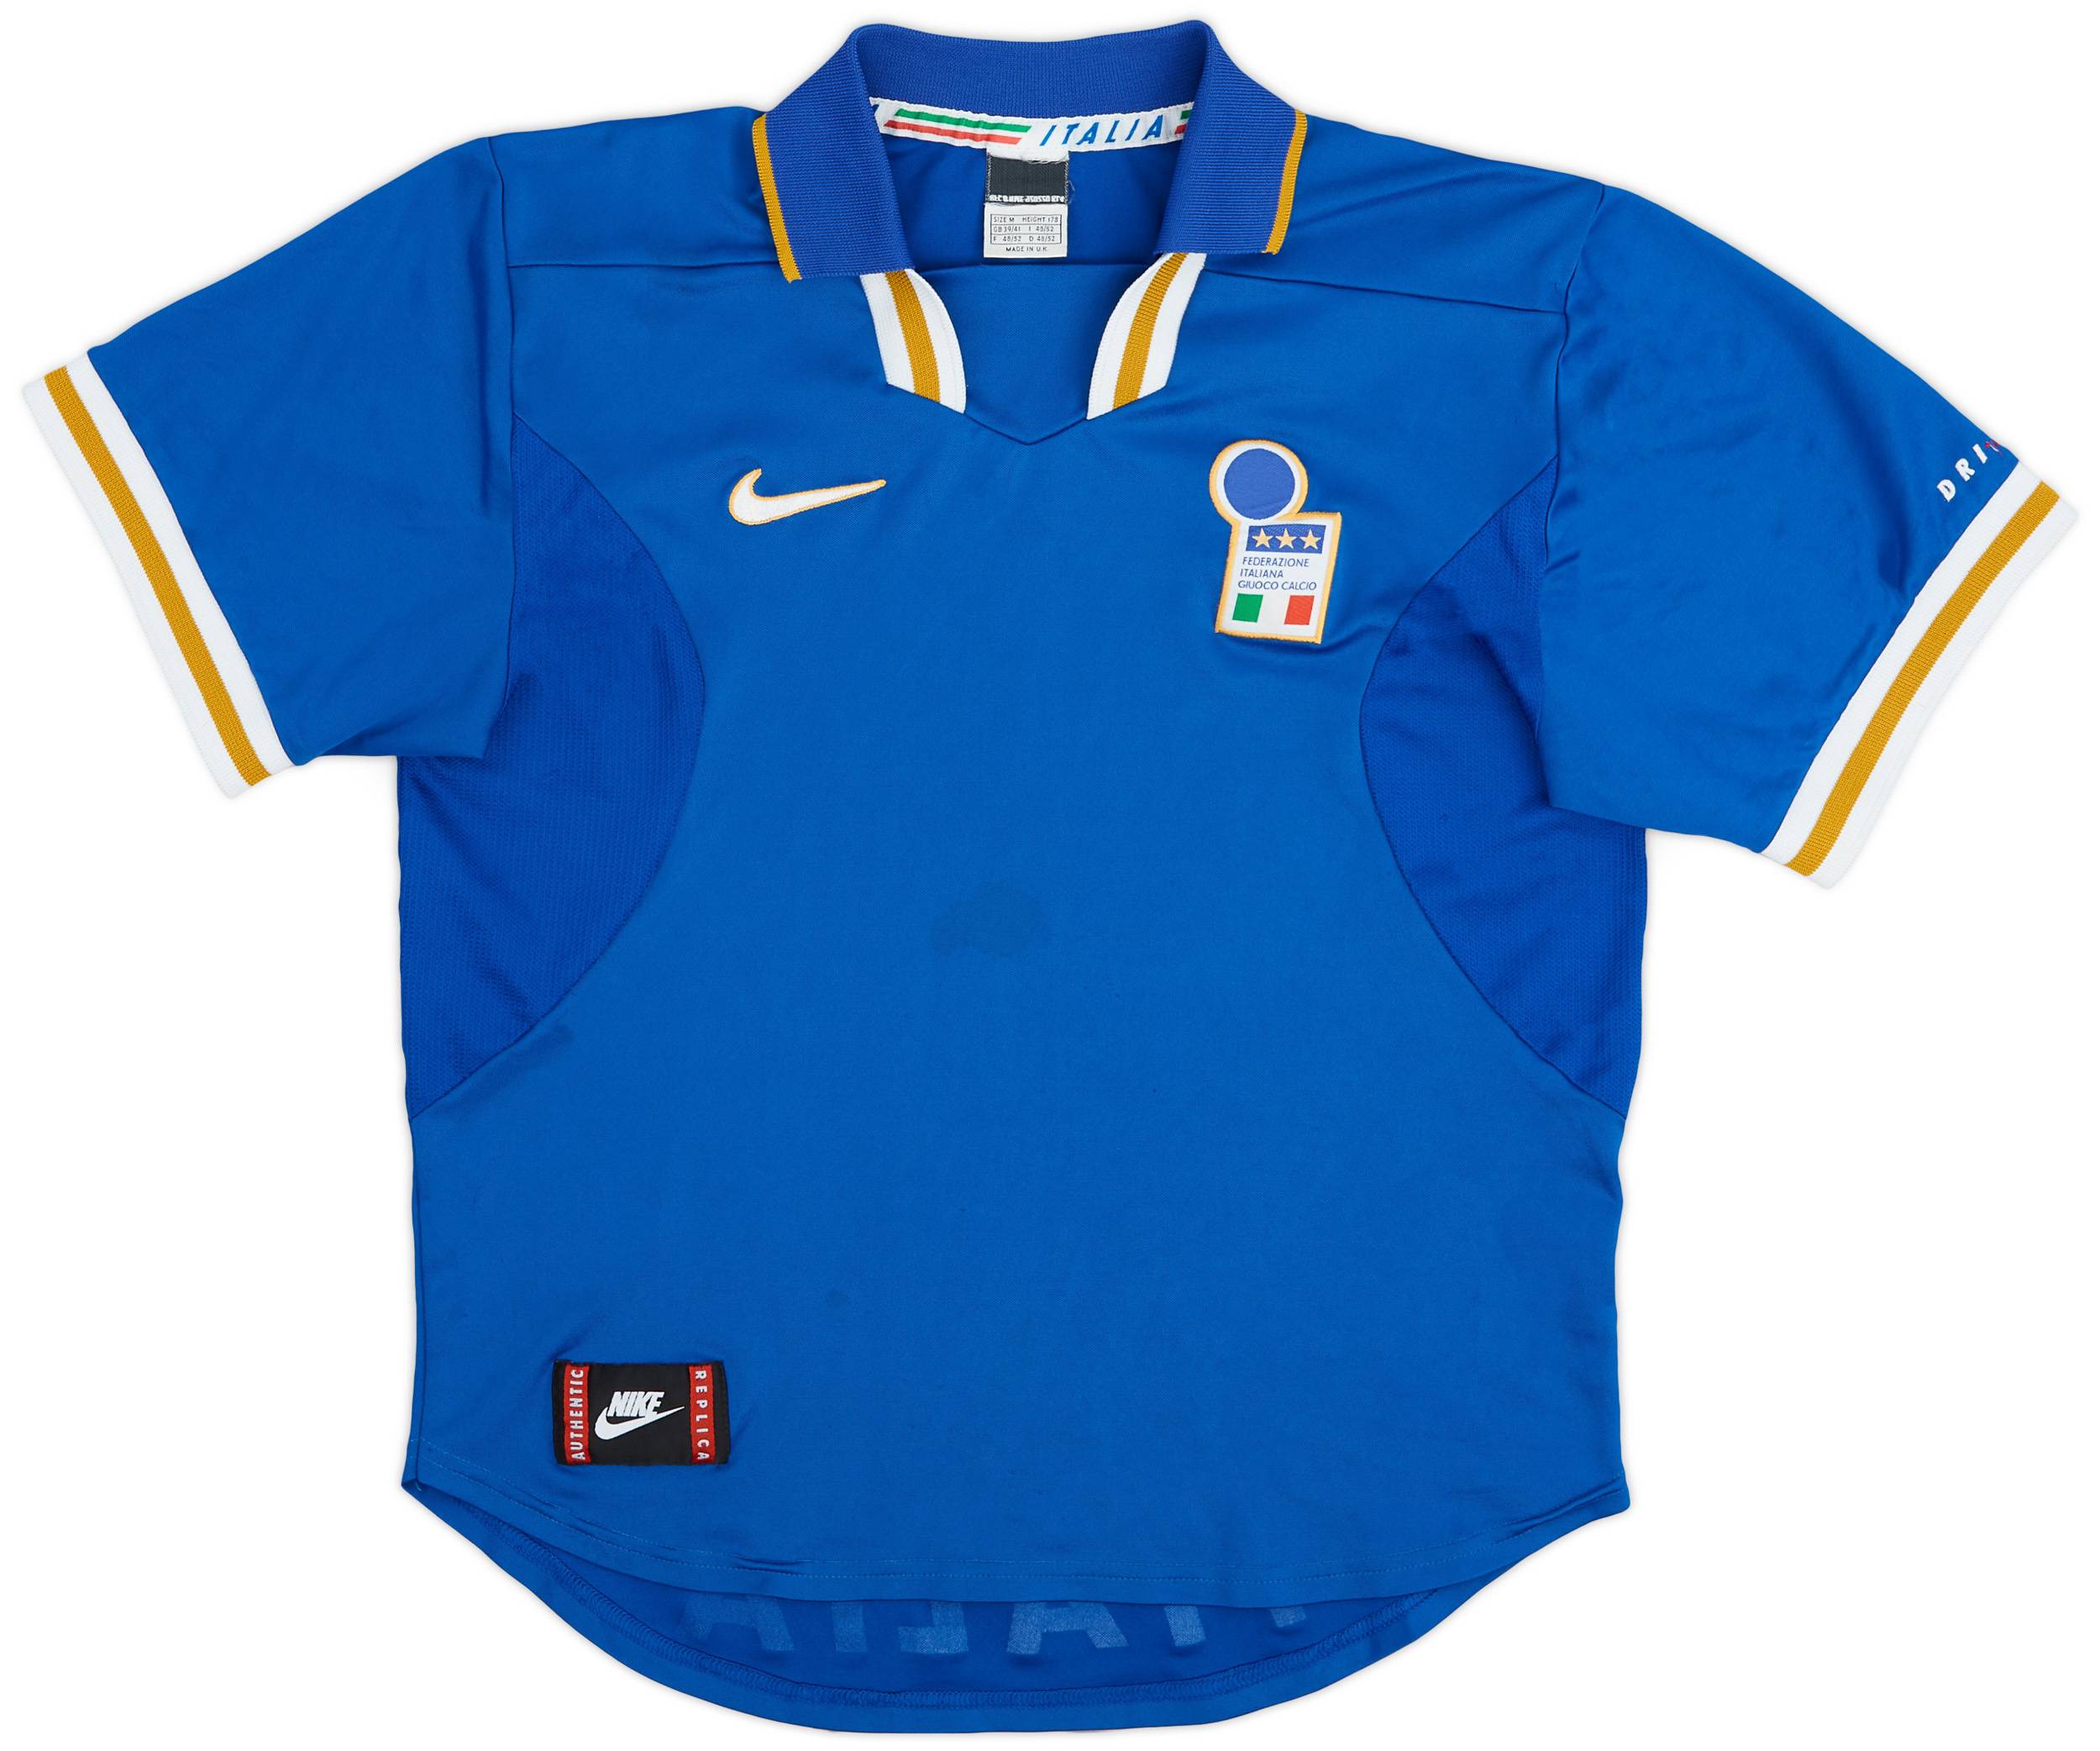 1996-97 Italy Home Shirt - 9/10 - (M)